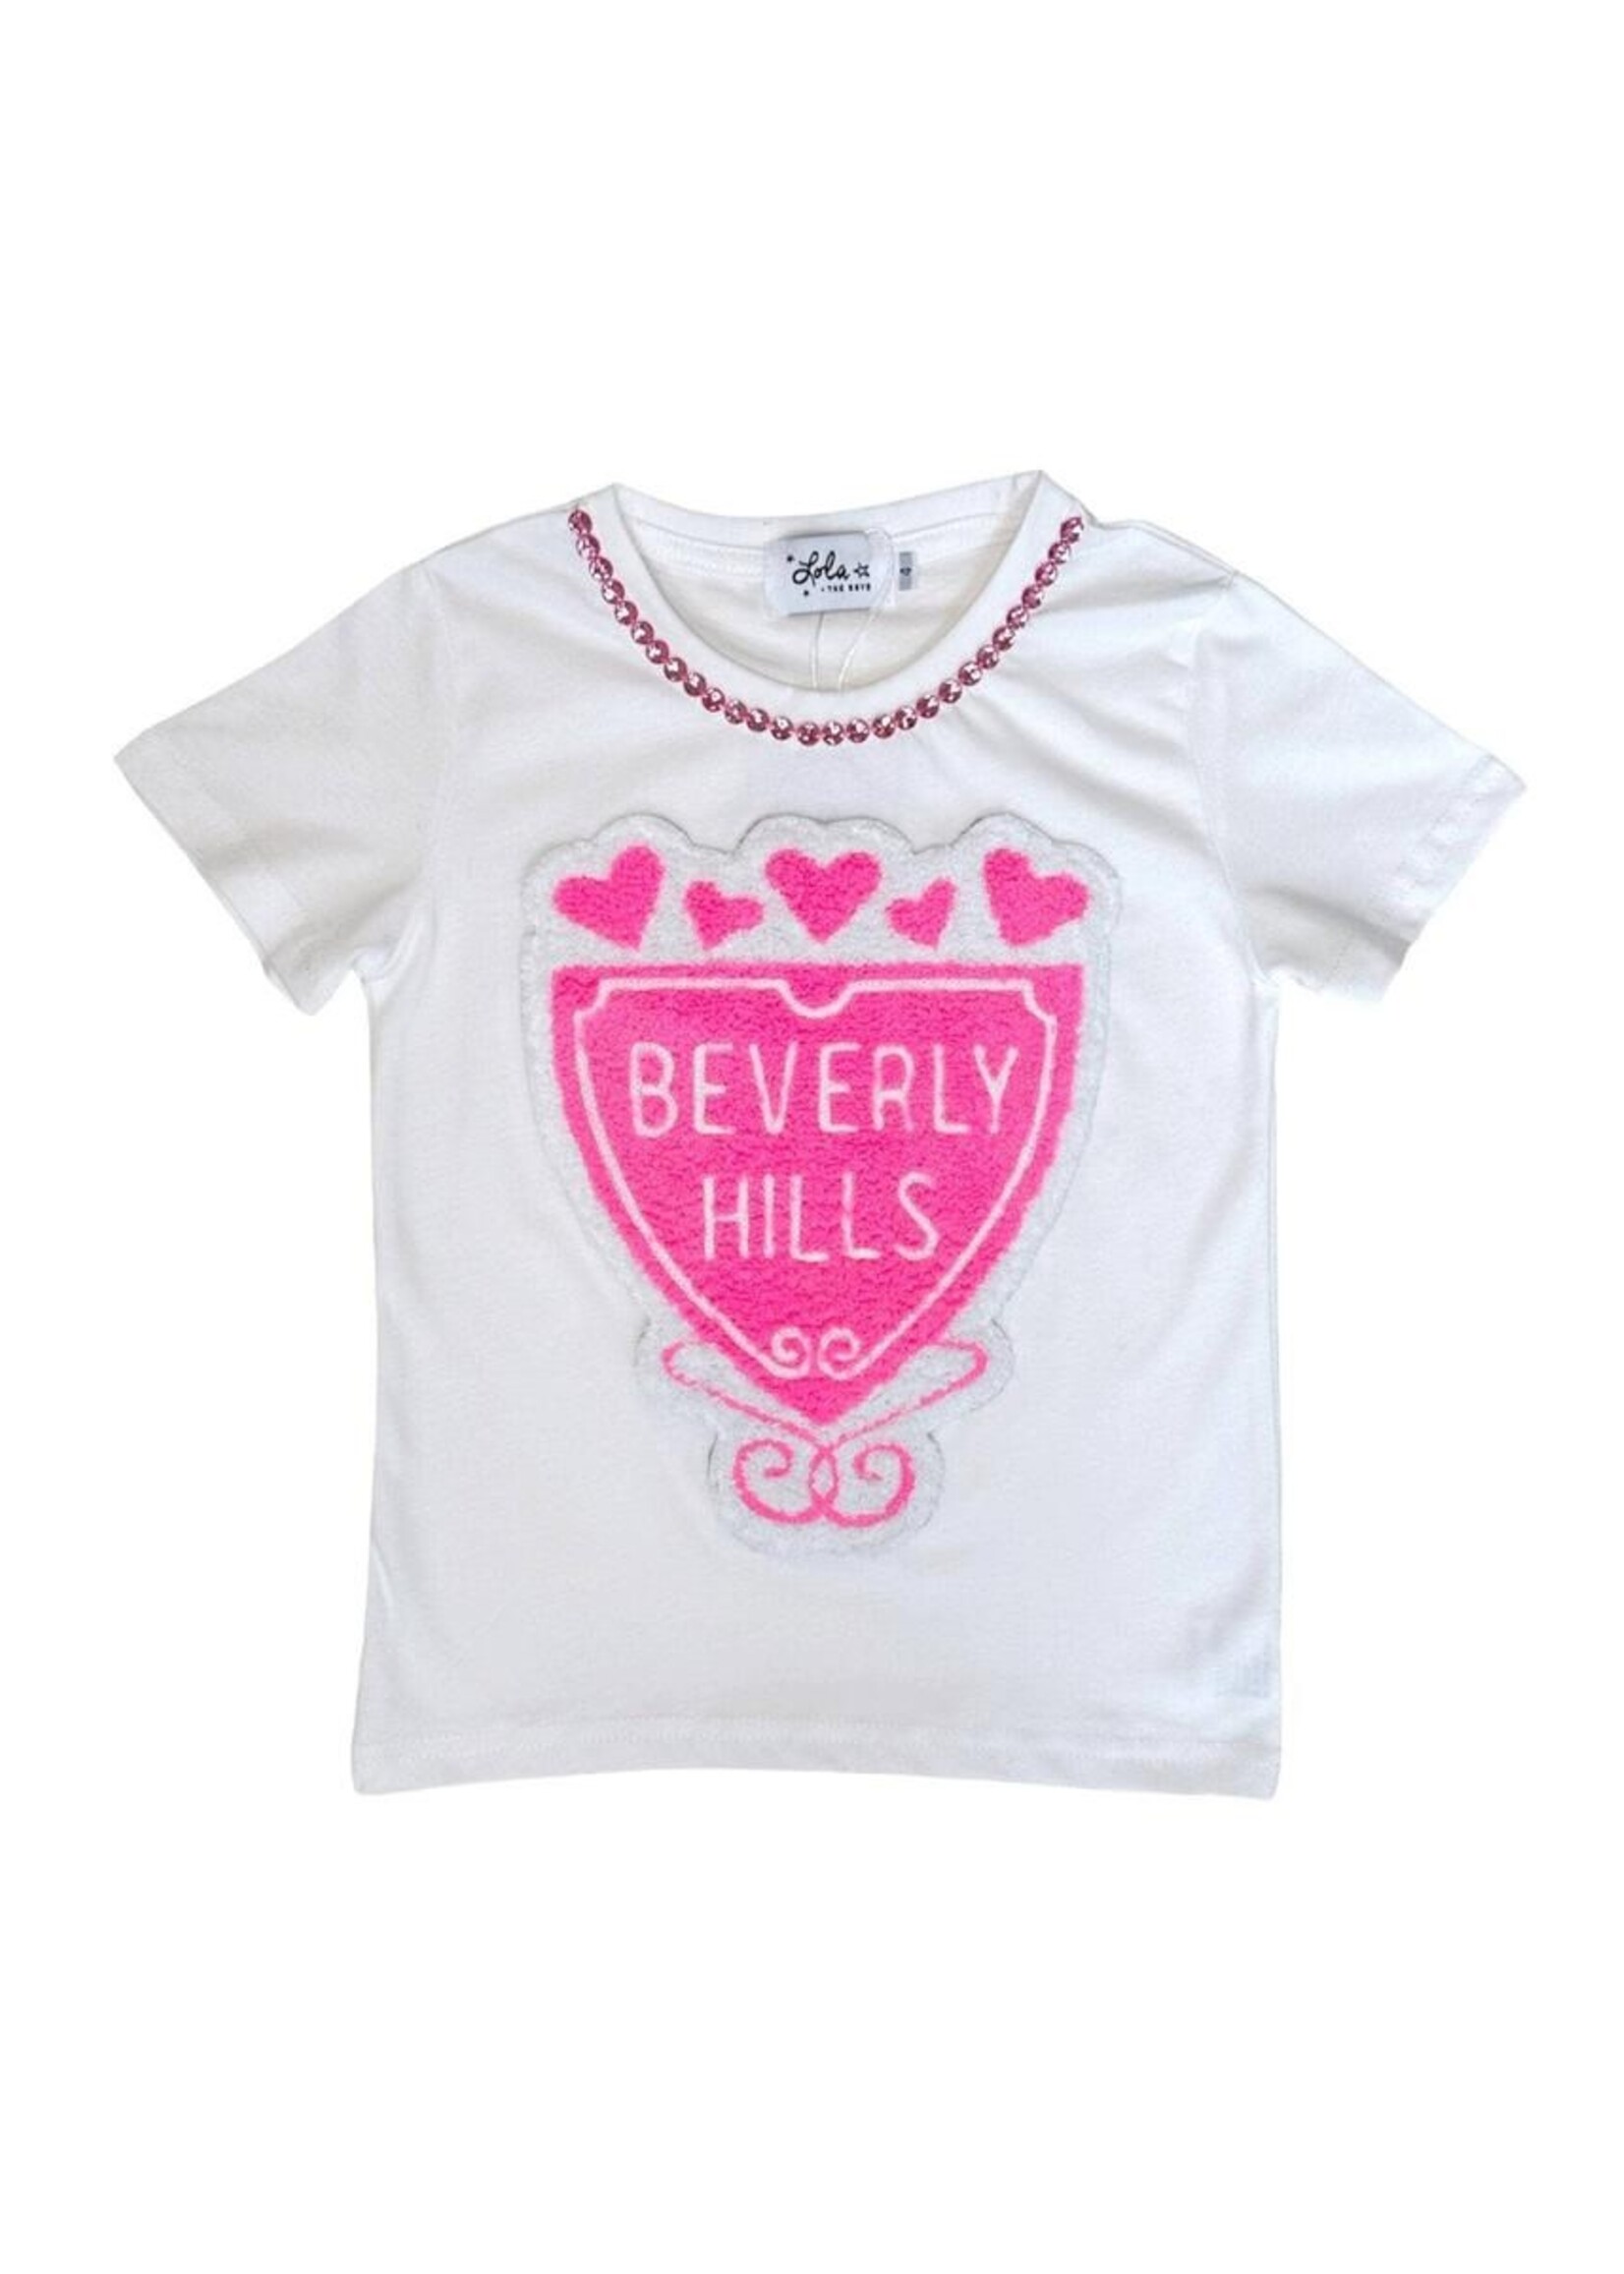 Lola and the Boys Beverly Hills Dreams Gem Shirt